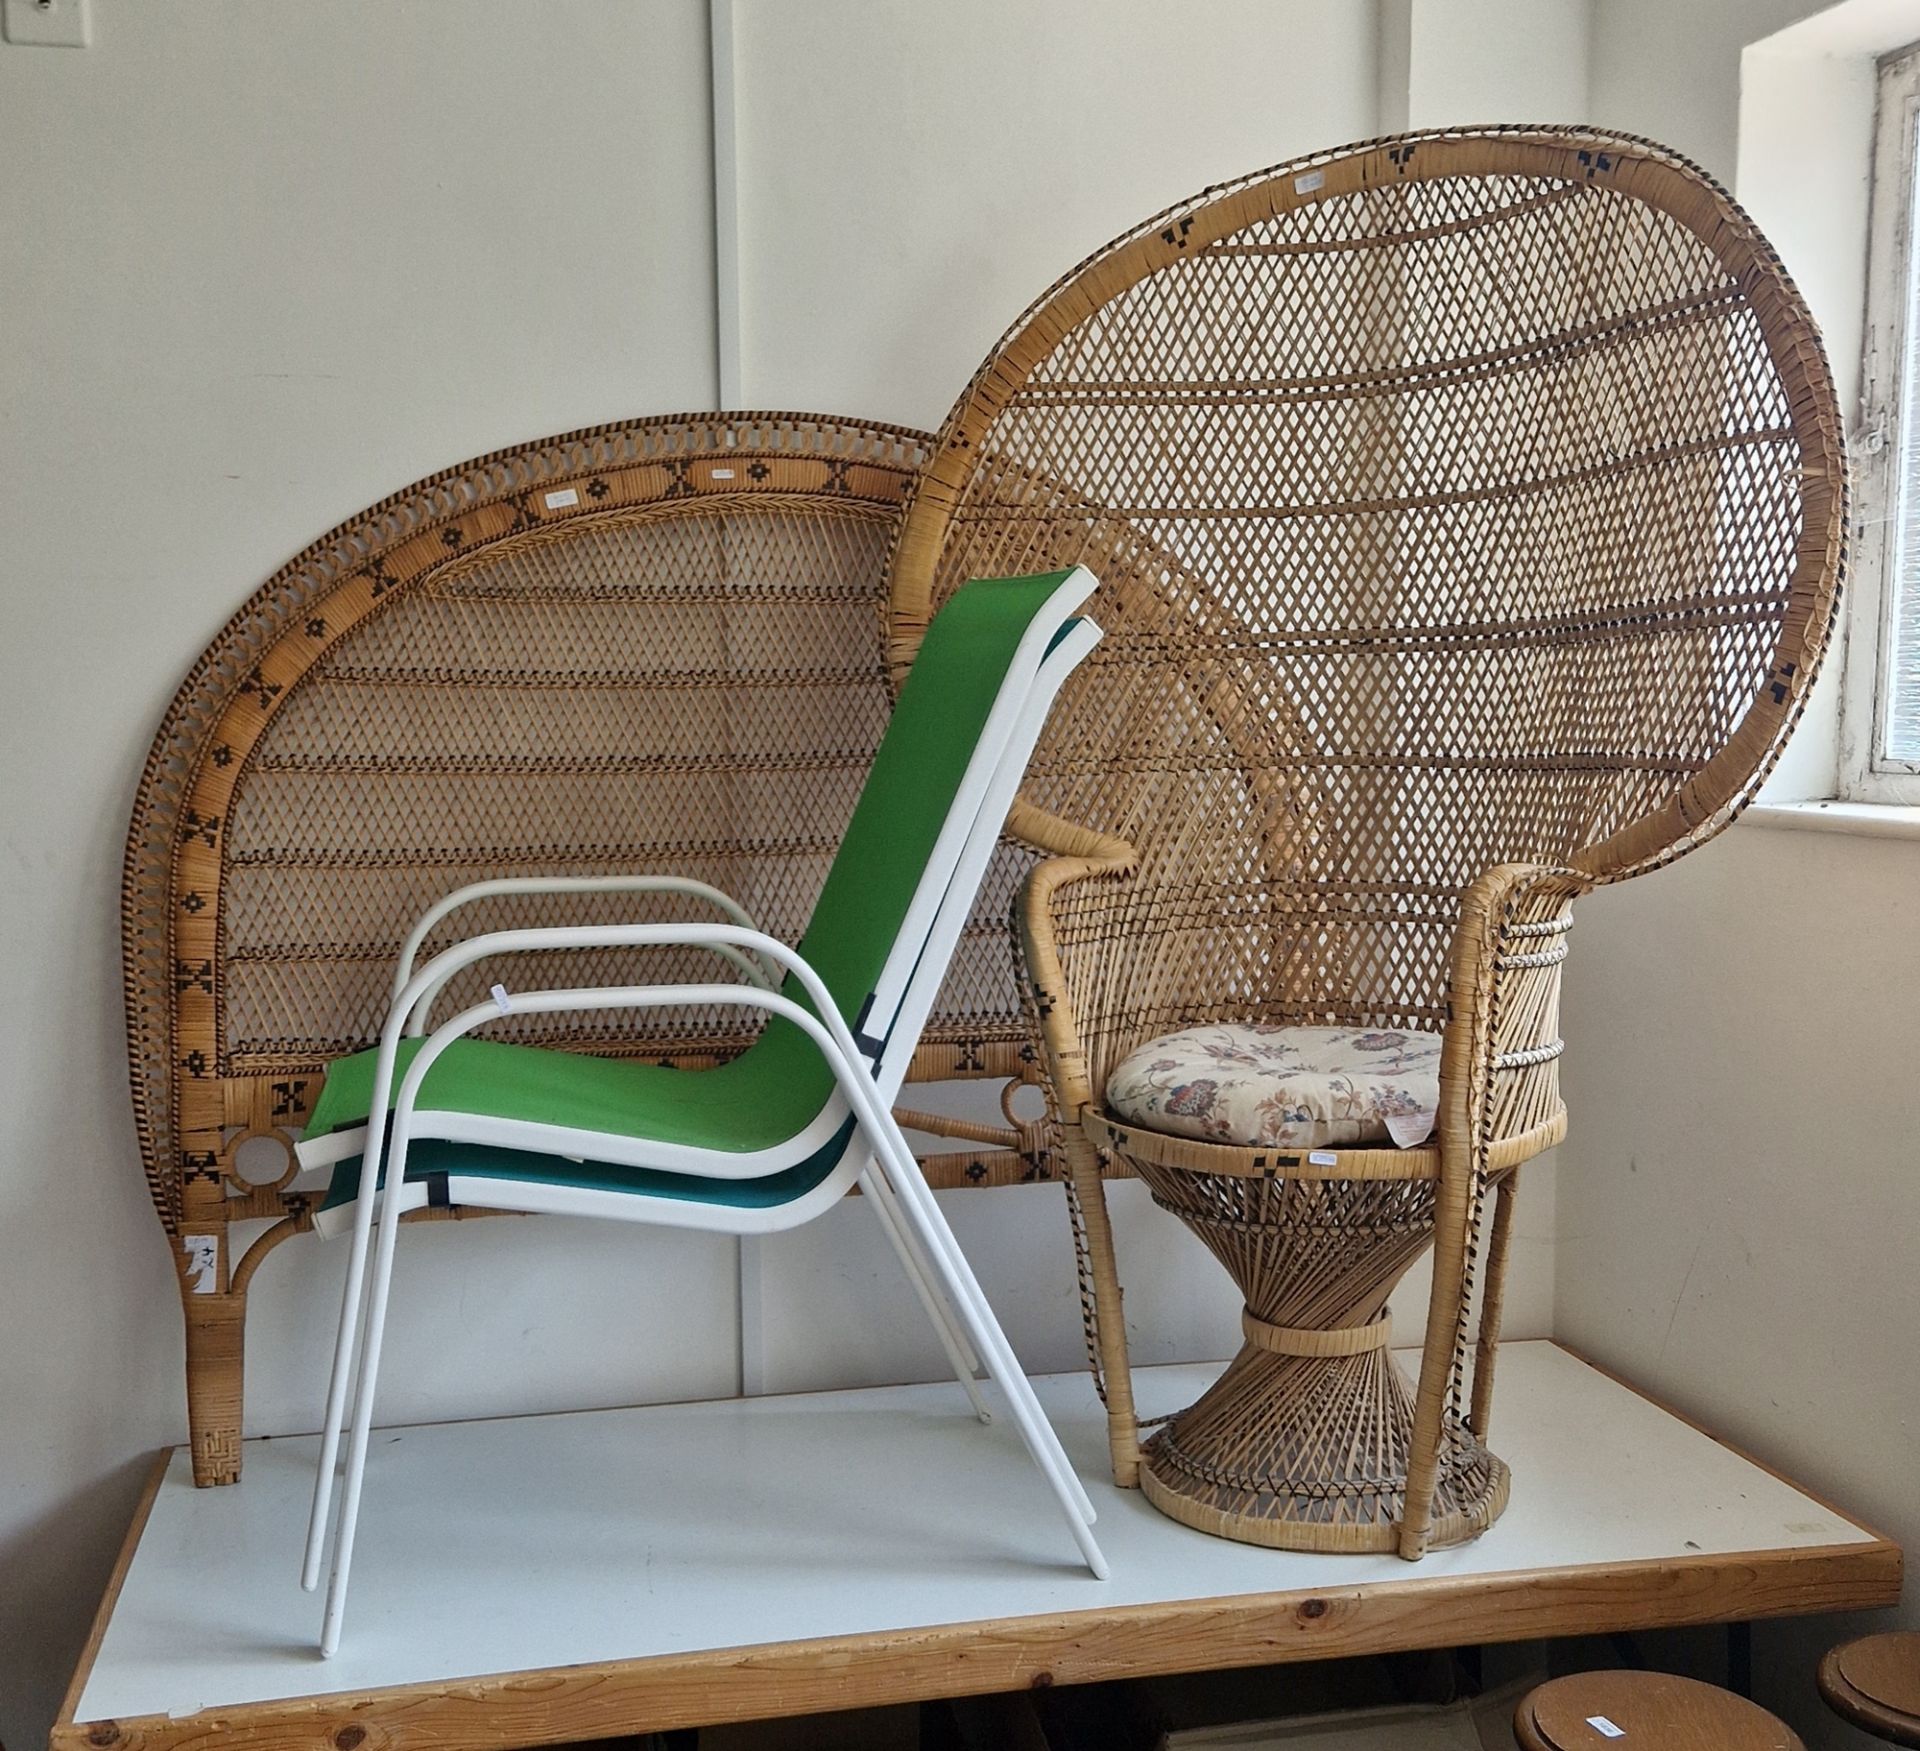 Mexicana-style cane chair, a matching 4ft bedhead, two nylon mesh and metal garden chairs, a box